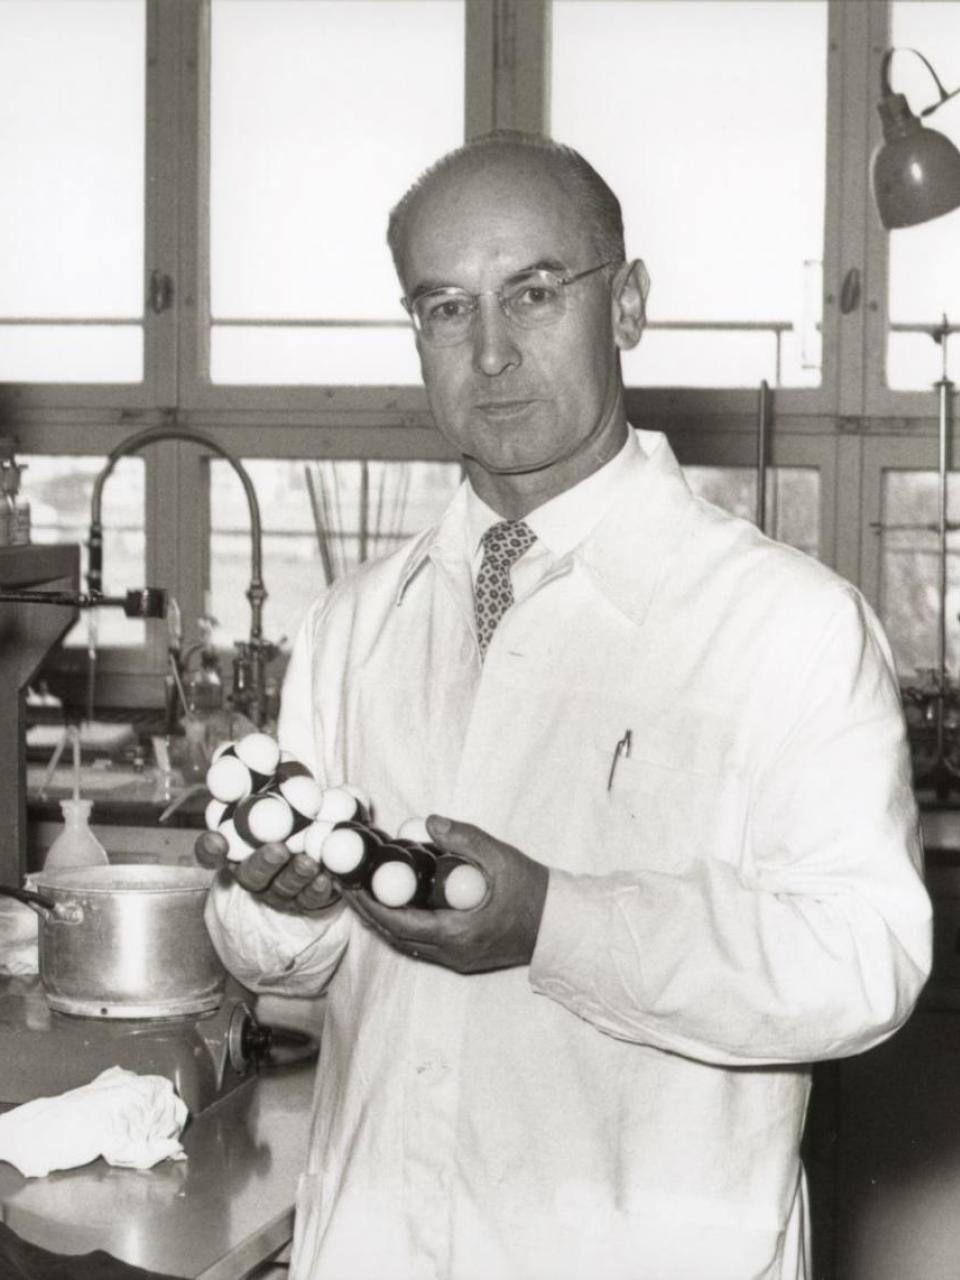 Albert Hofmann with a model of the LSD molecule in the early 1950s © Novartis corporate archive